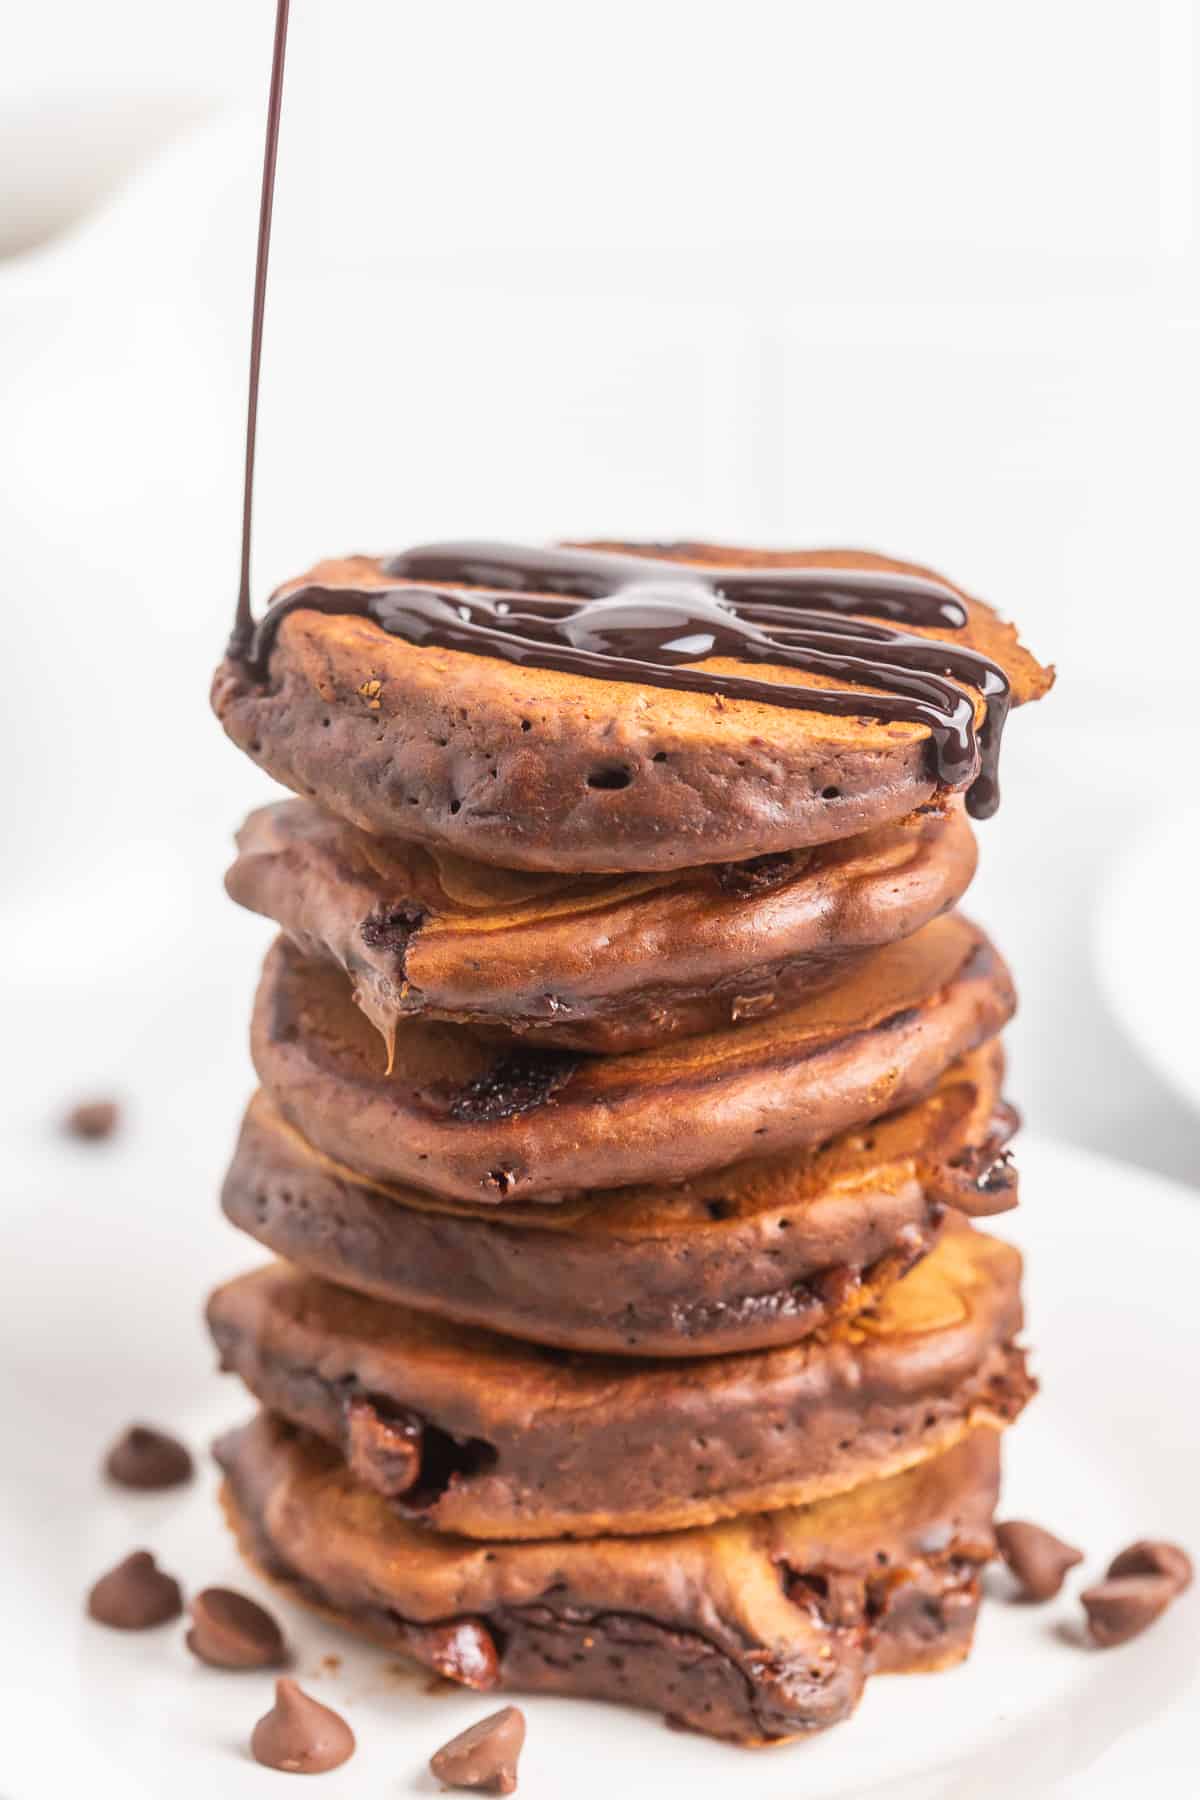 Syrup being poured on chocolate pancakes.